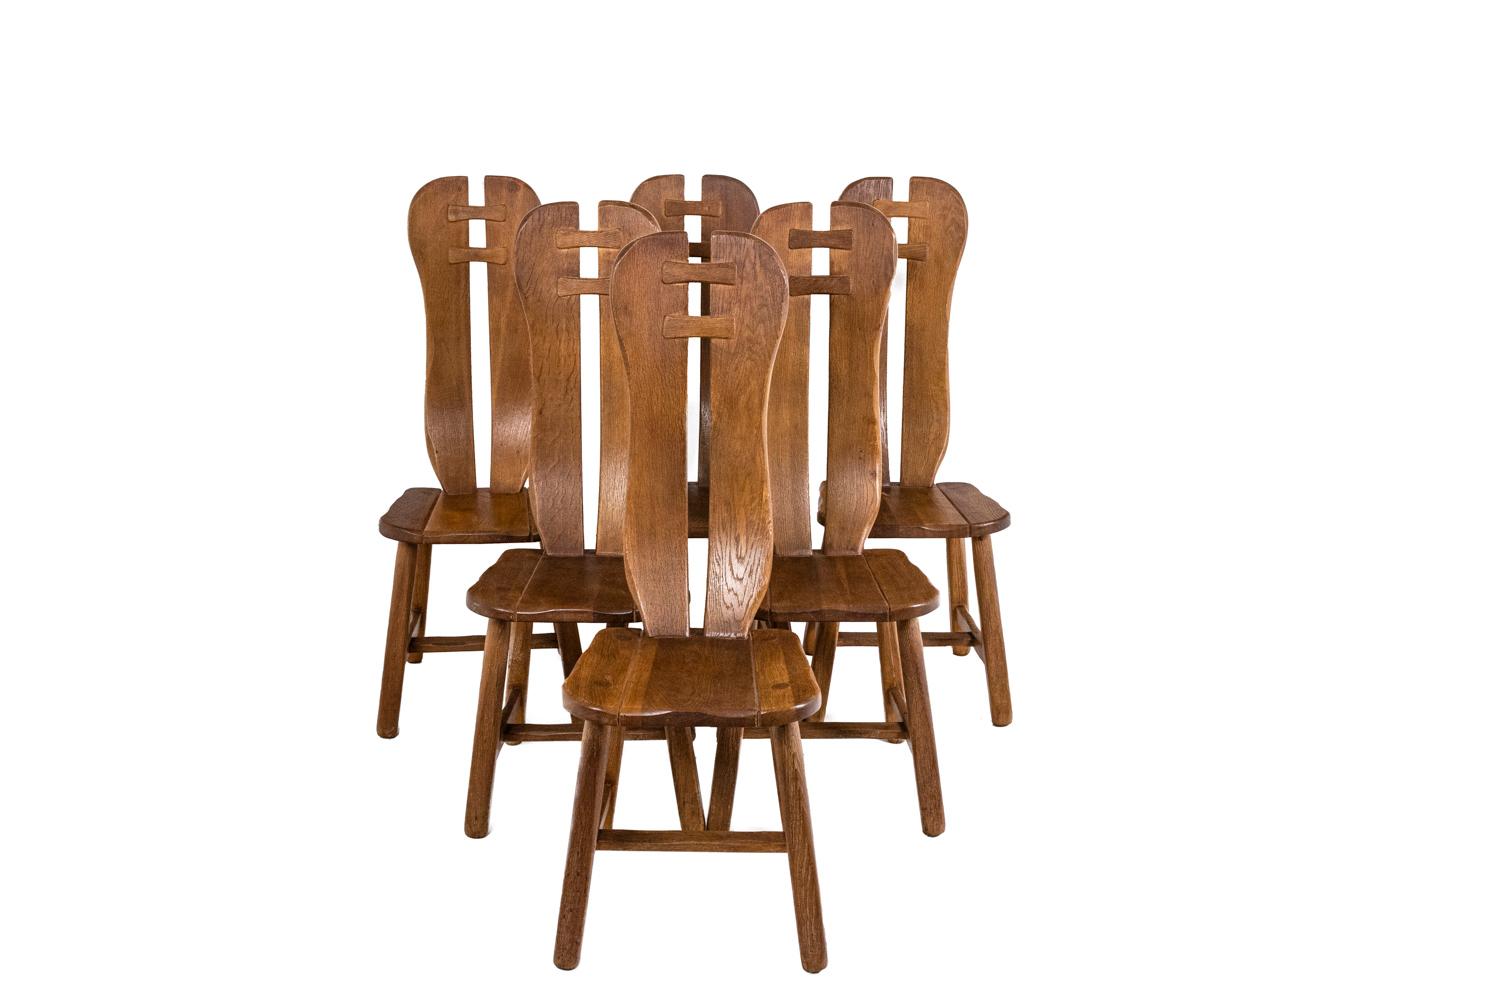 Kunstmeubelen De Puydt, edited by.

Table and six chairs in oak. Round table Chairs with high back, curved and elongated shape. Openwork backrest joined by two wooden slats. Base joined by two spacer bars.

Belgian work realized in the